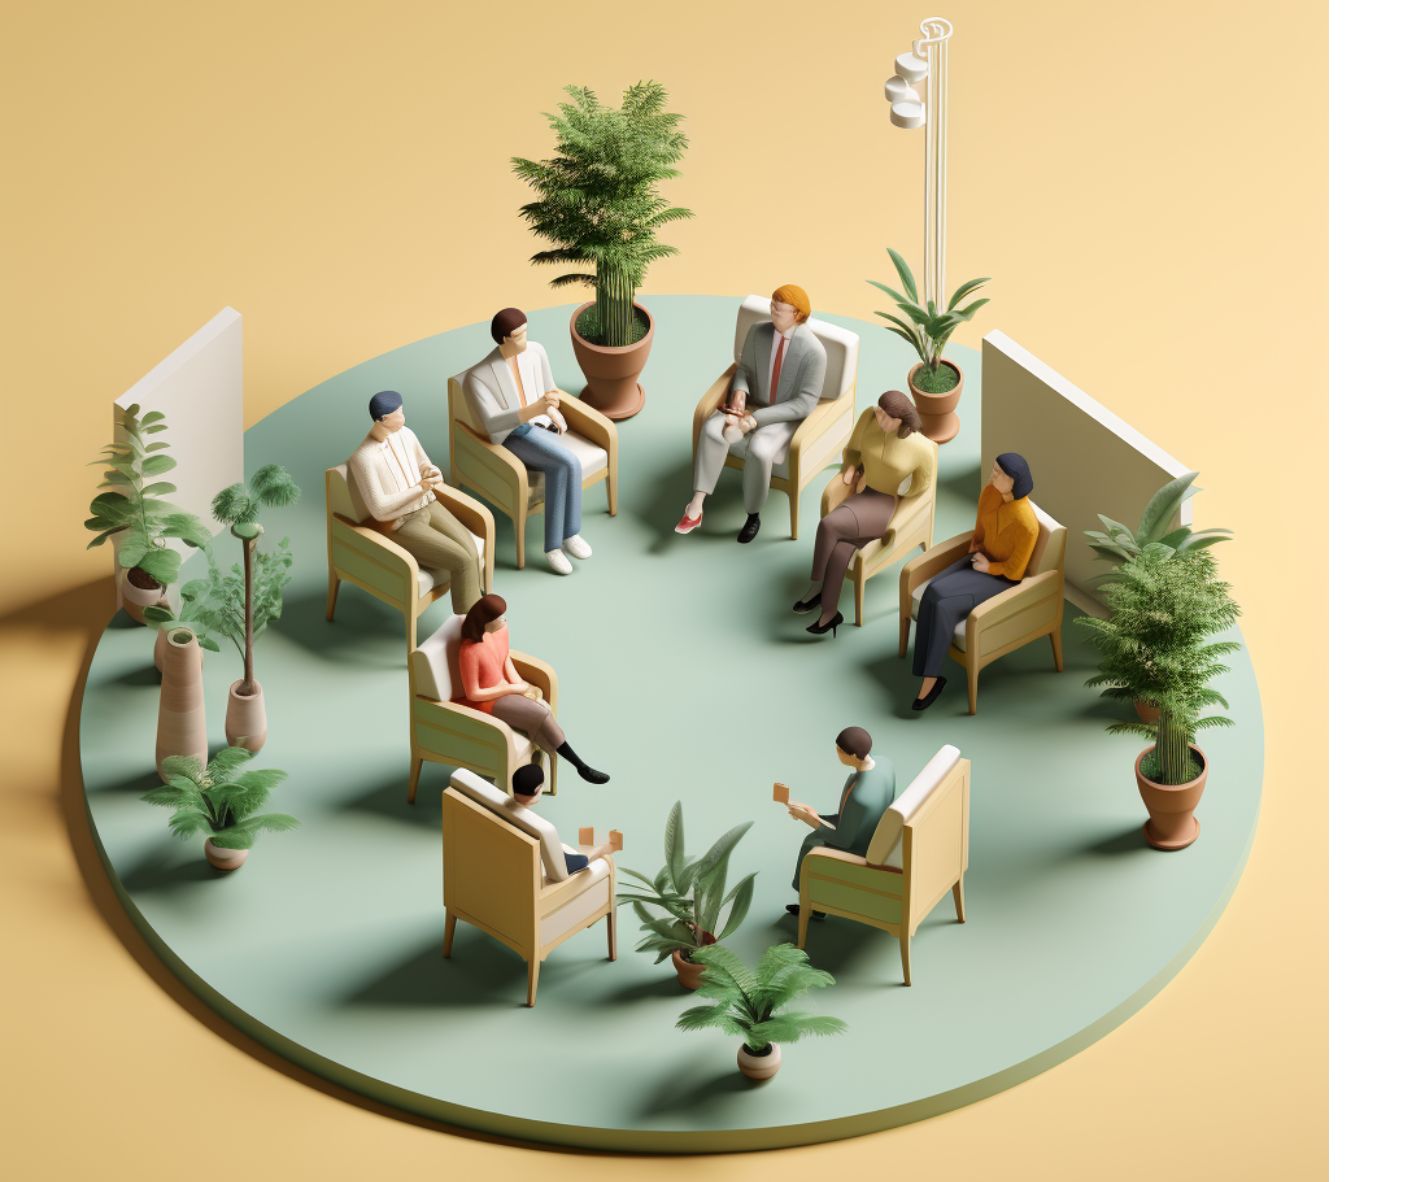 Illustrated graphic of people seated in a circle talking to each other.